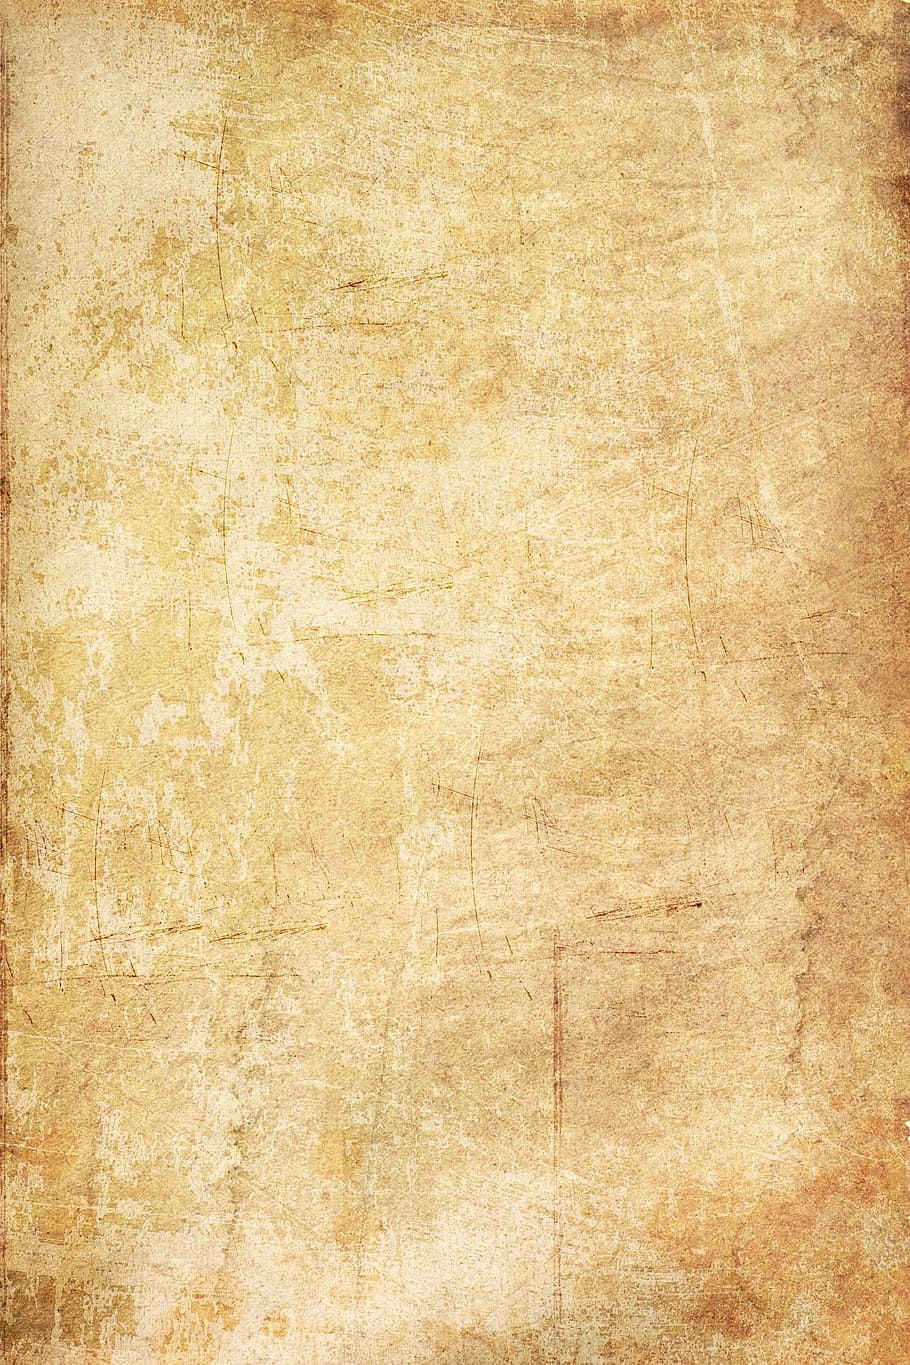 background, yellow, texture, textured, backgrounds, dirty, paper, old, antique, textured effect